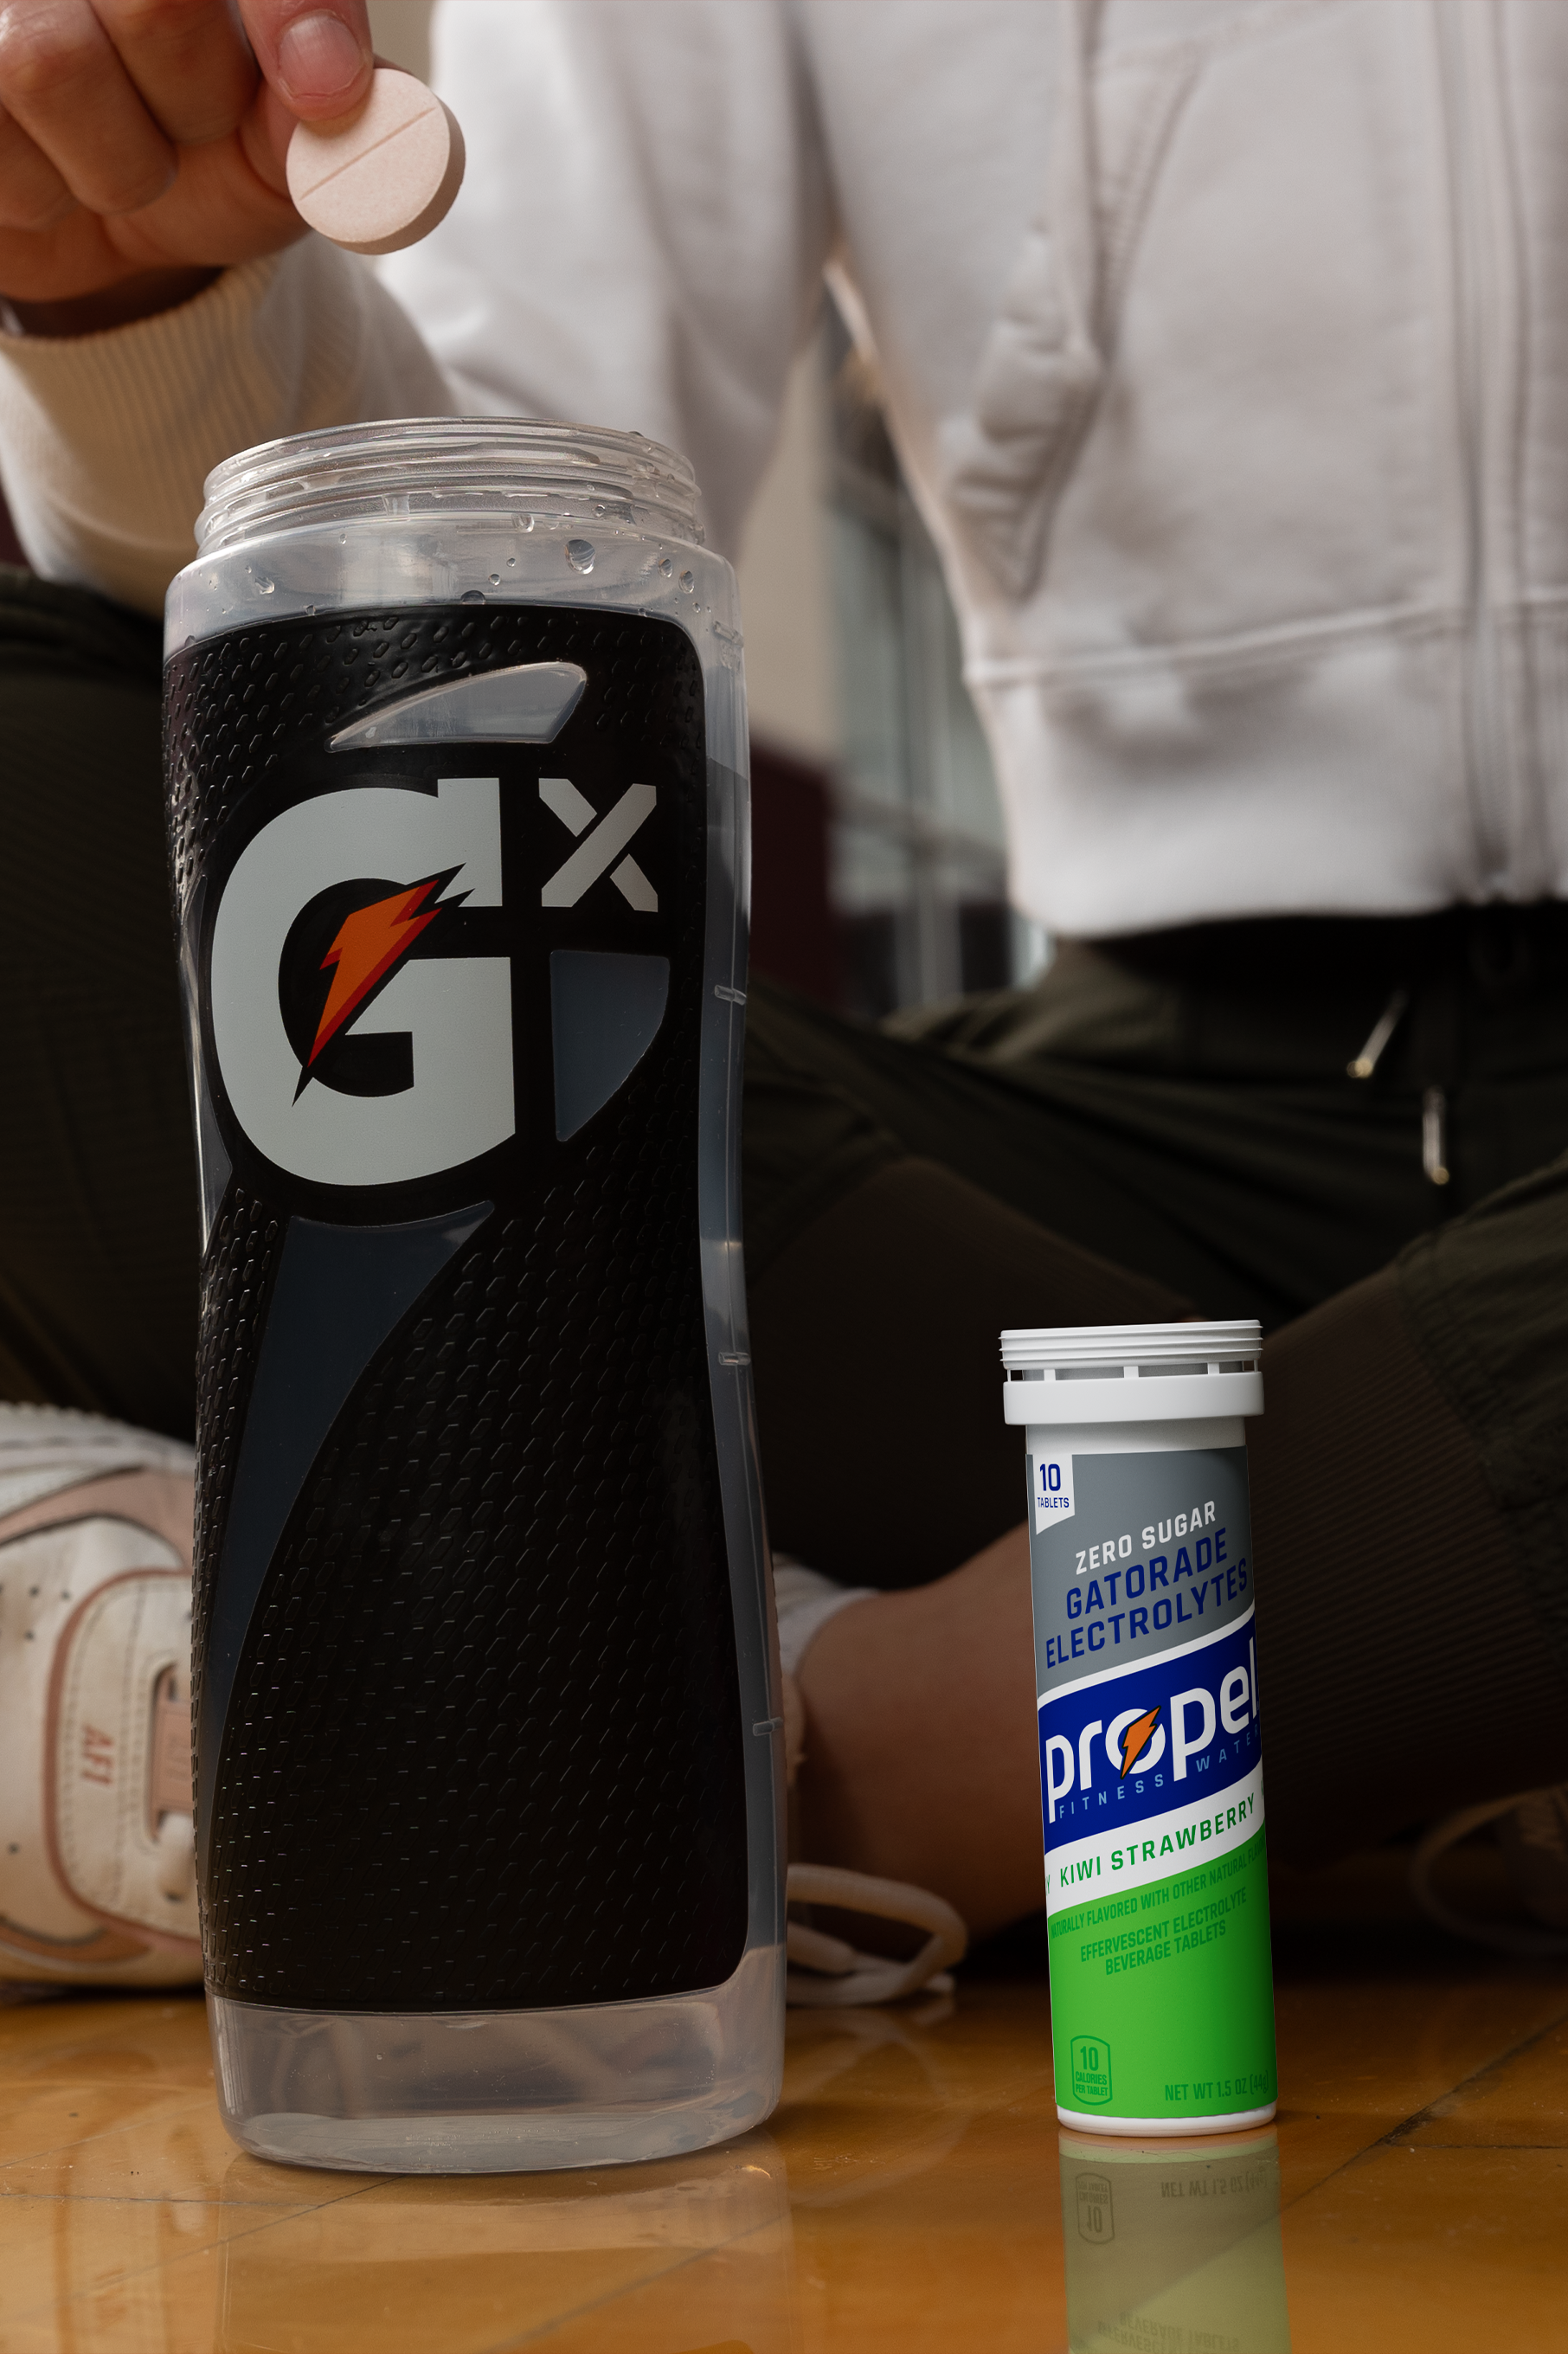 Athlete dropping Propel Kiwi Strawberry Tablet into Gx Squeeze bottle